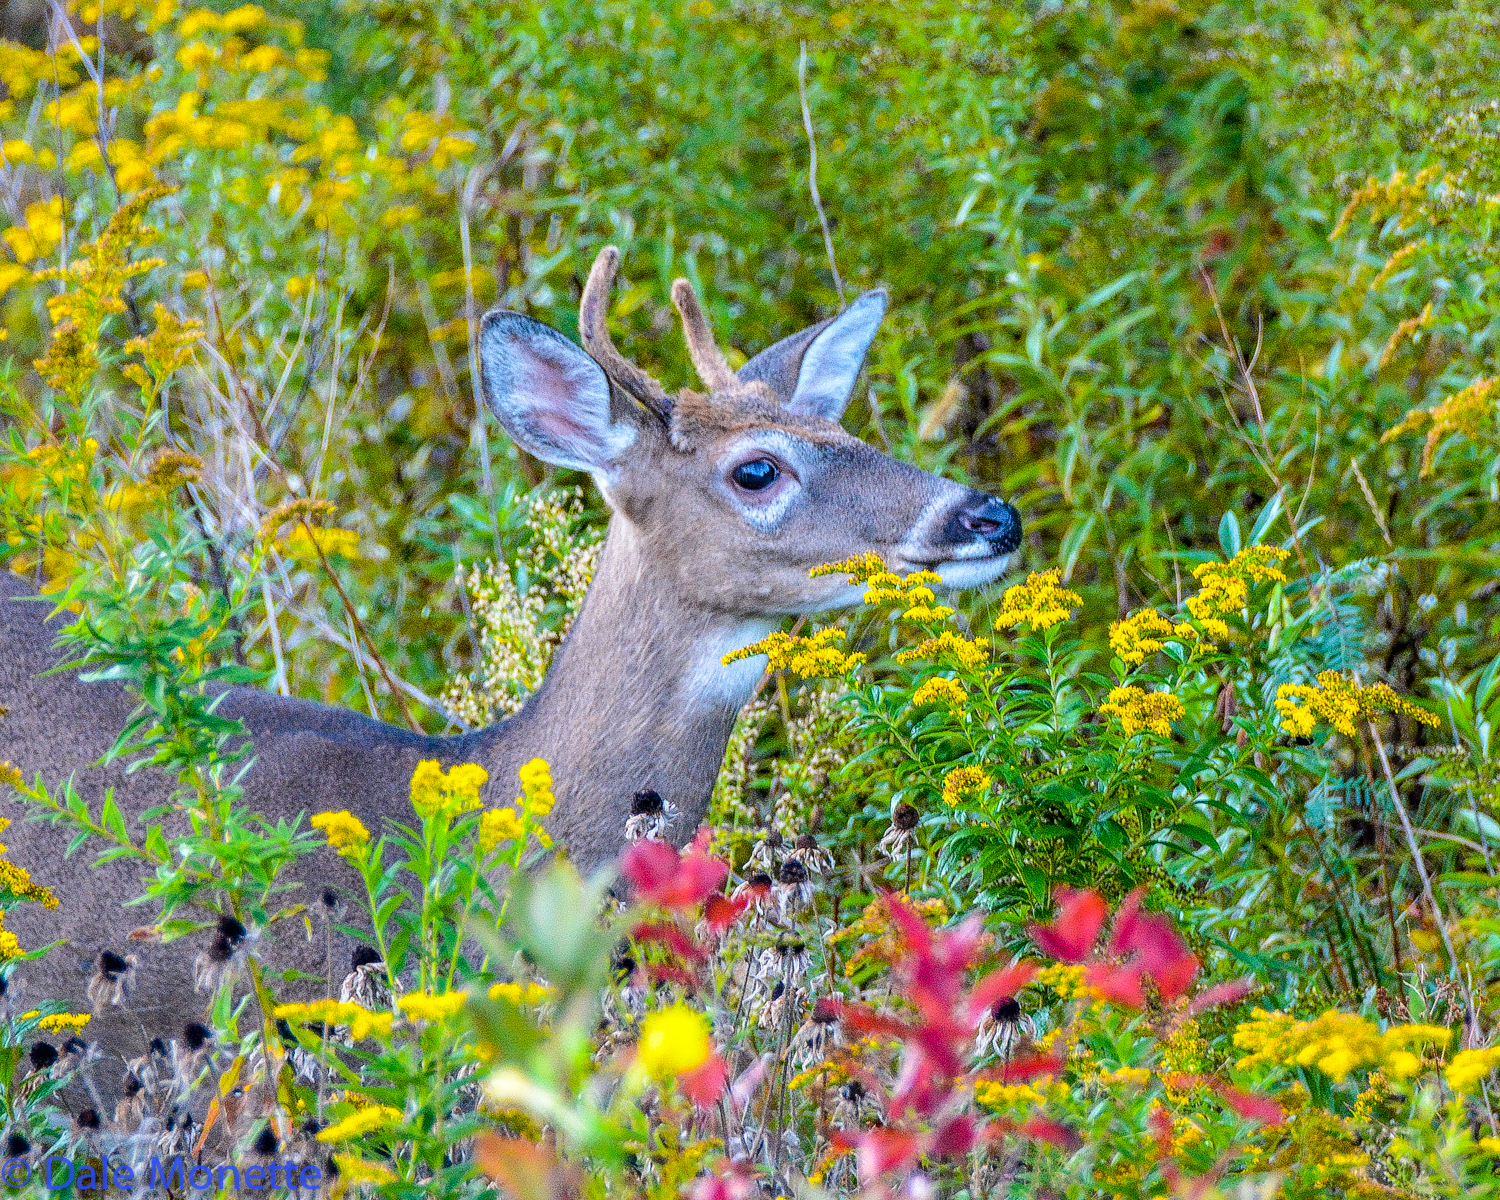   It turned out to be a young&nbsp;spike horn buck. A few minutes down the road I spotted him 20 feet from me in a flower patch.  